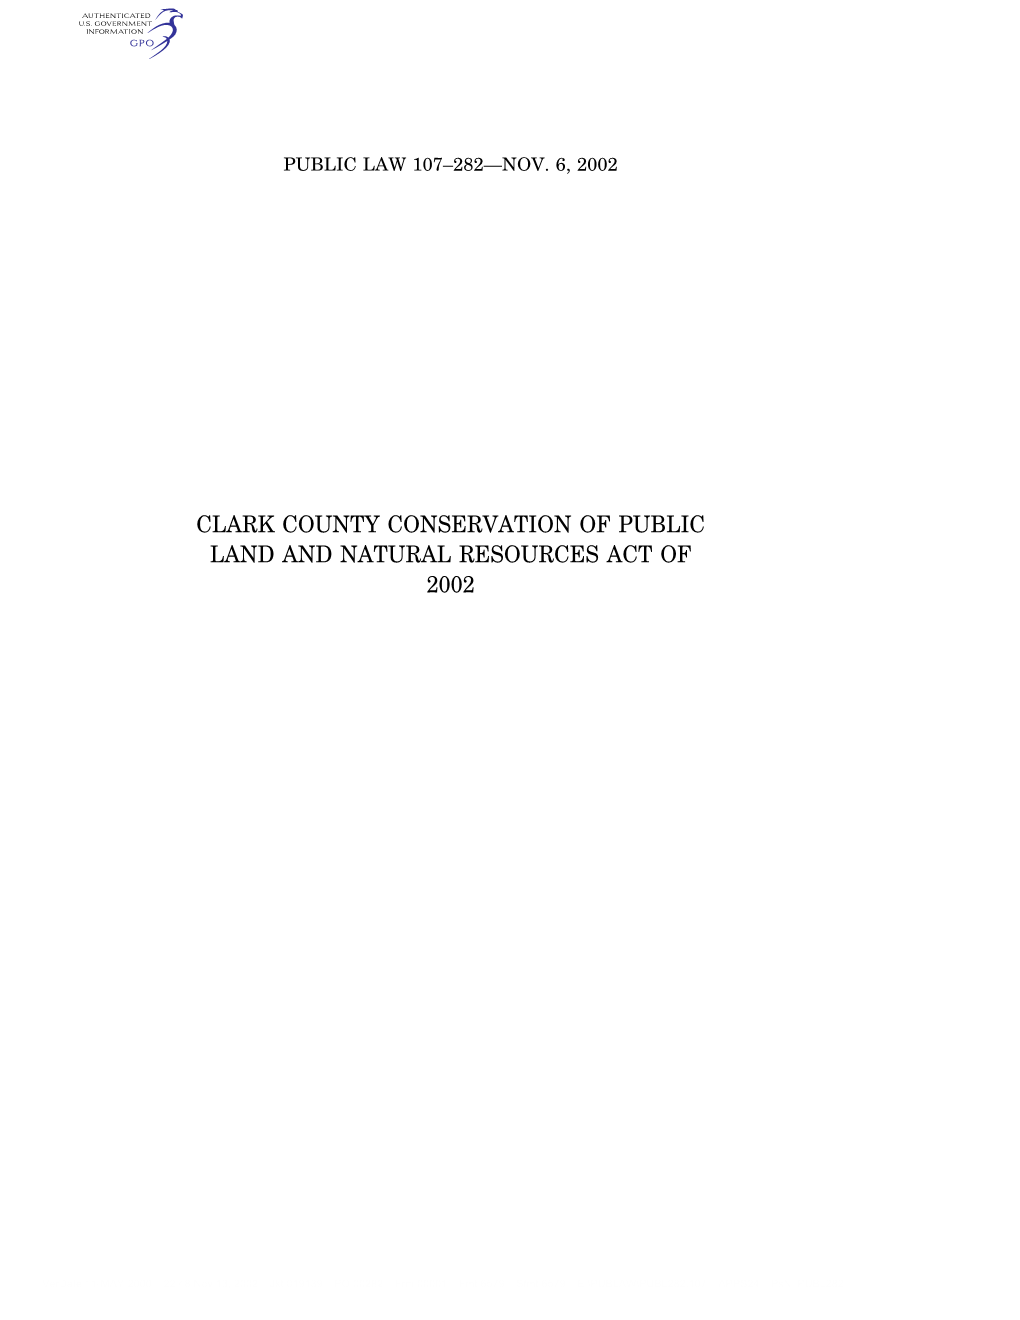 Clark County Conservation of Public Land and Natural Resources Act of 2002